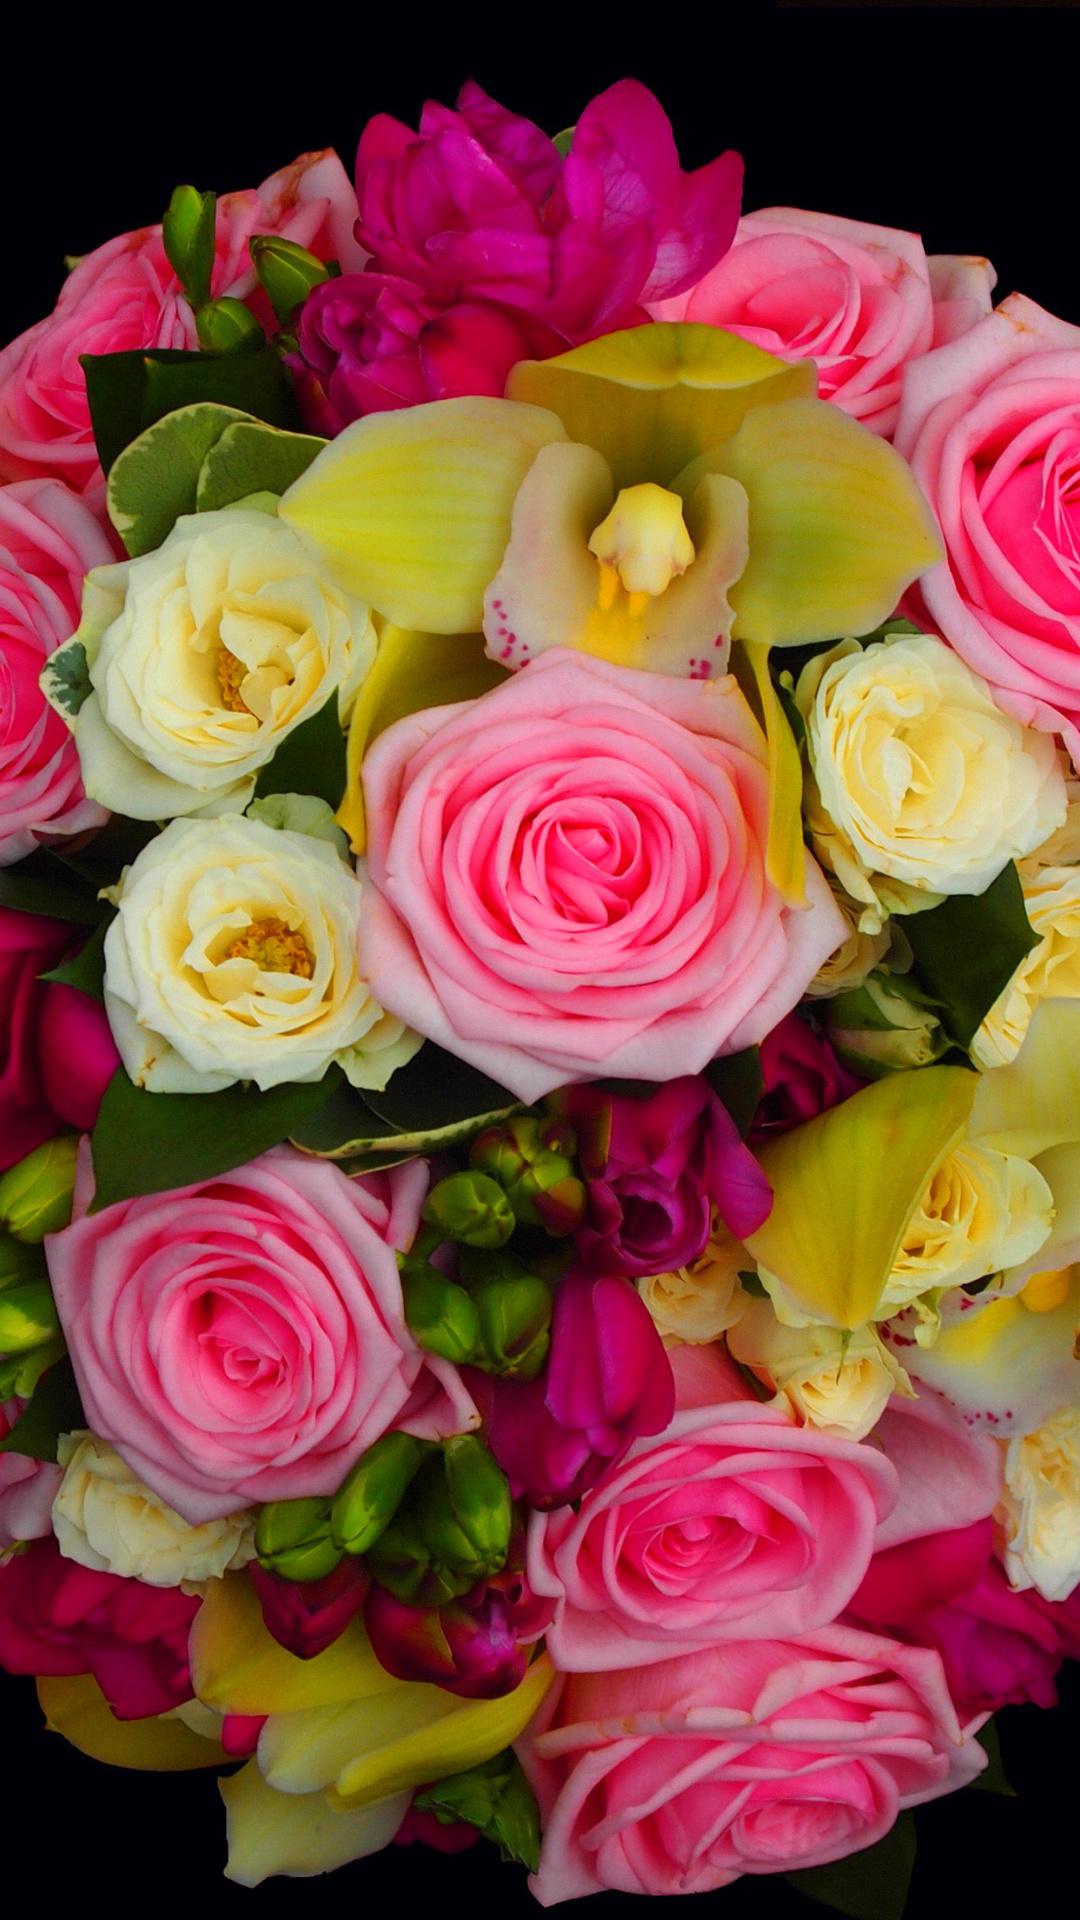 Bouquet of roses and yellow orchid, floristry wallpaper 1080x1920